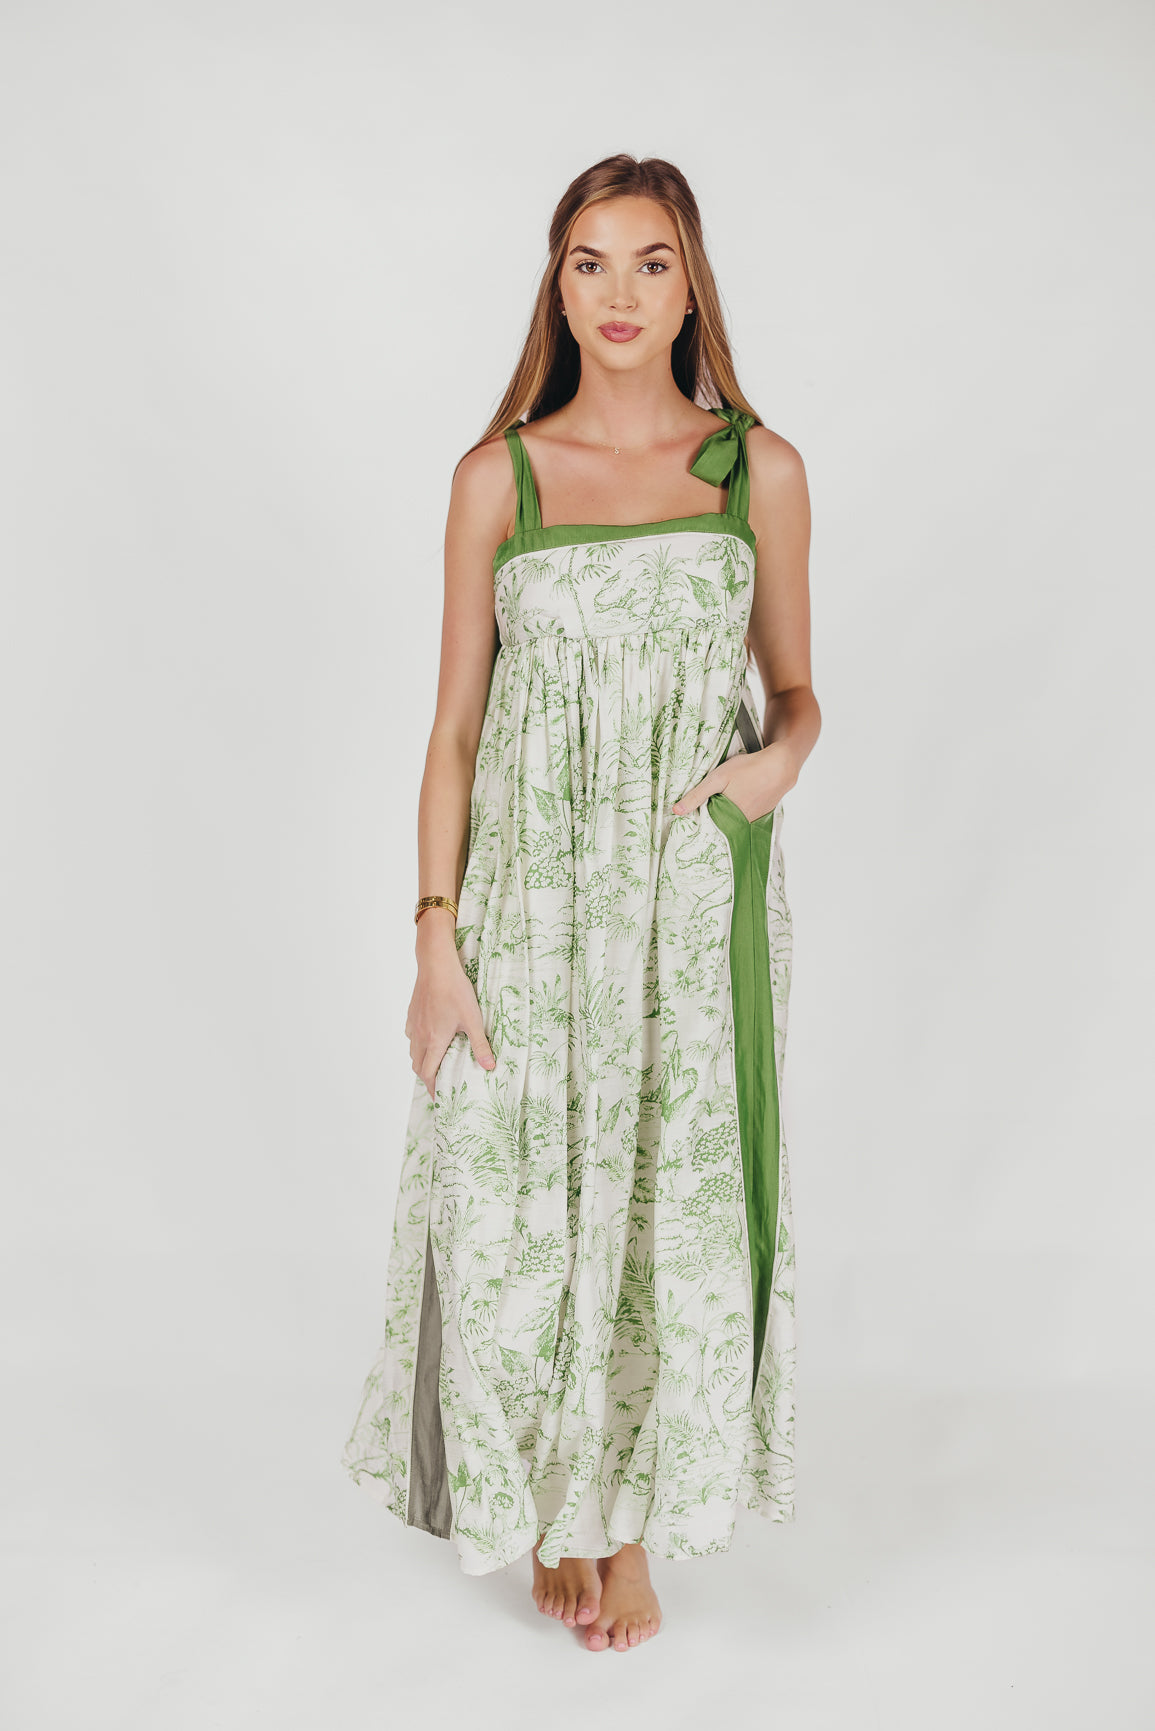 Sunny Floral Maxi Dress with Tie Straps in Green Palm